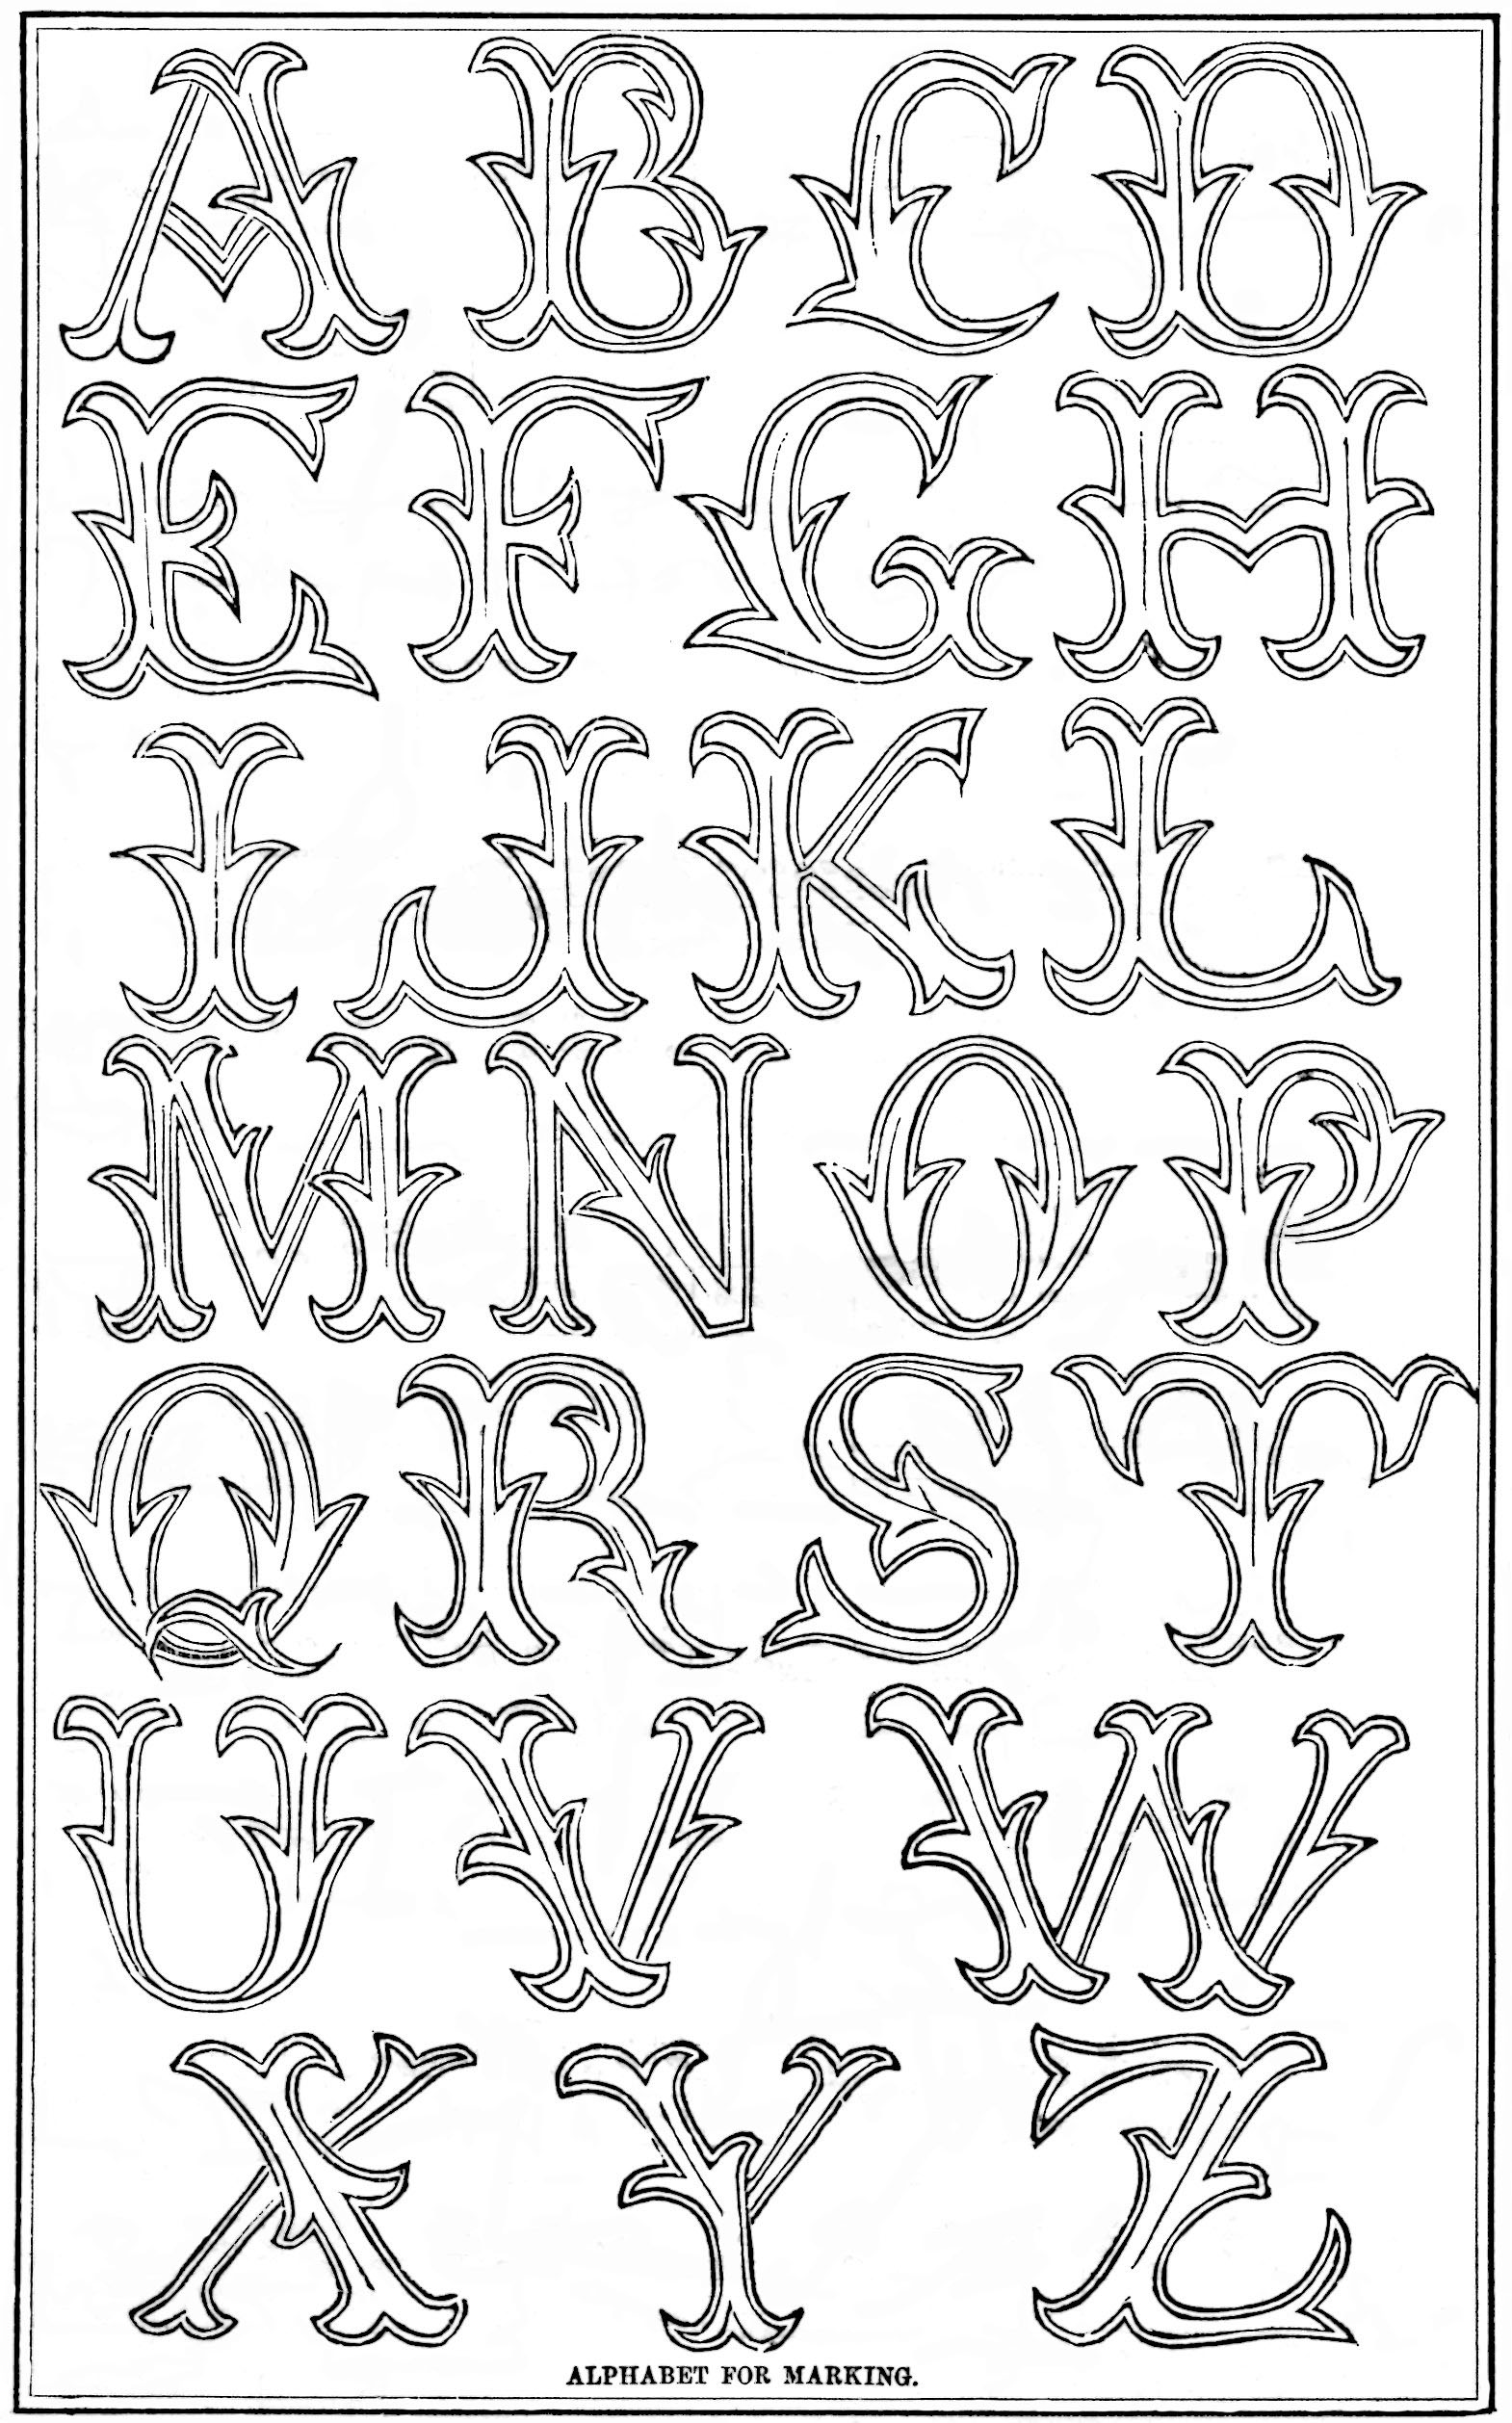 Fancy Antique Alphabet Patterns for Embroidery Monograms